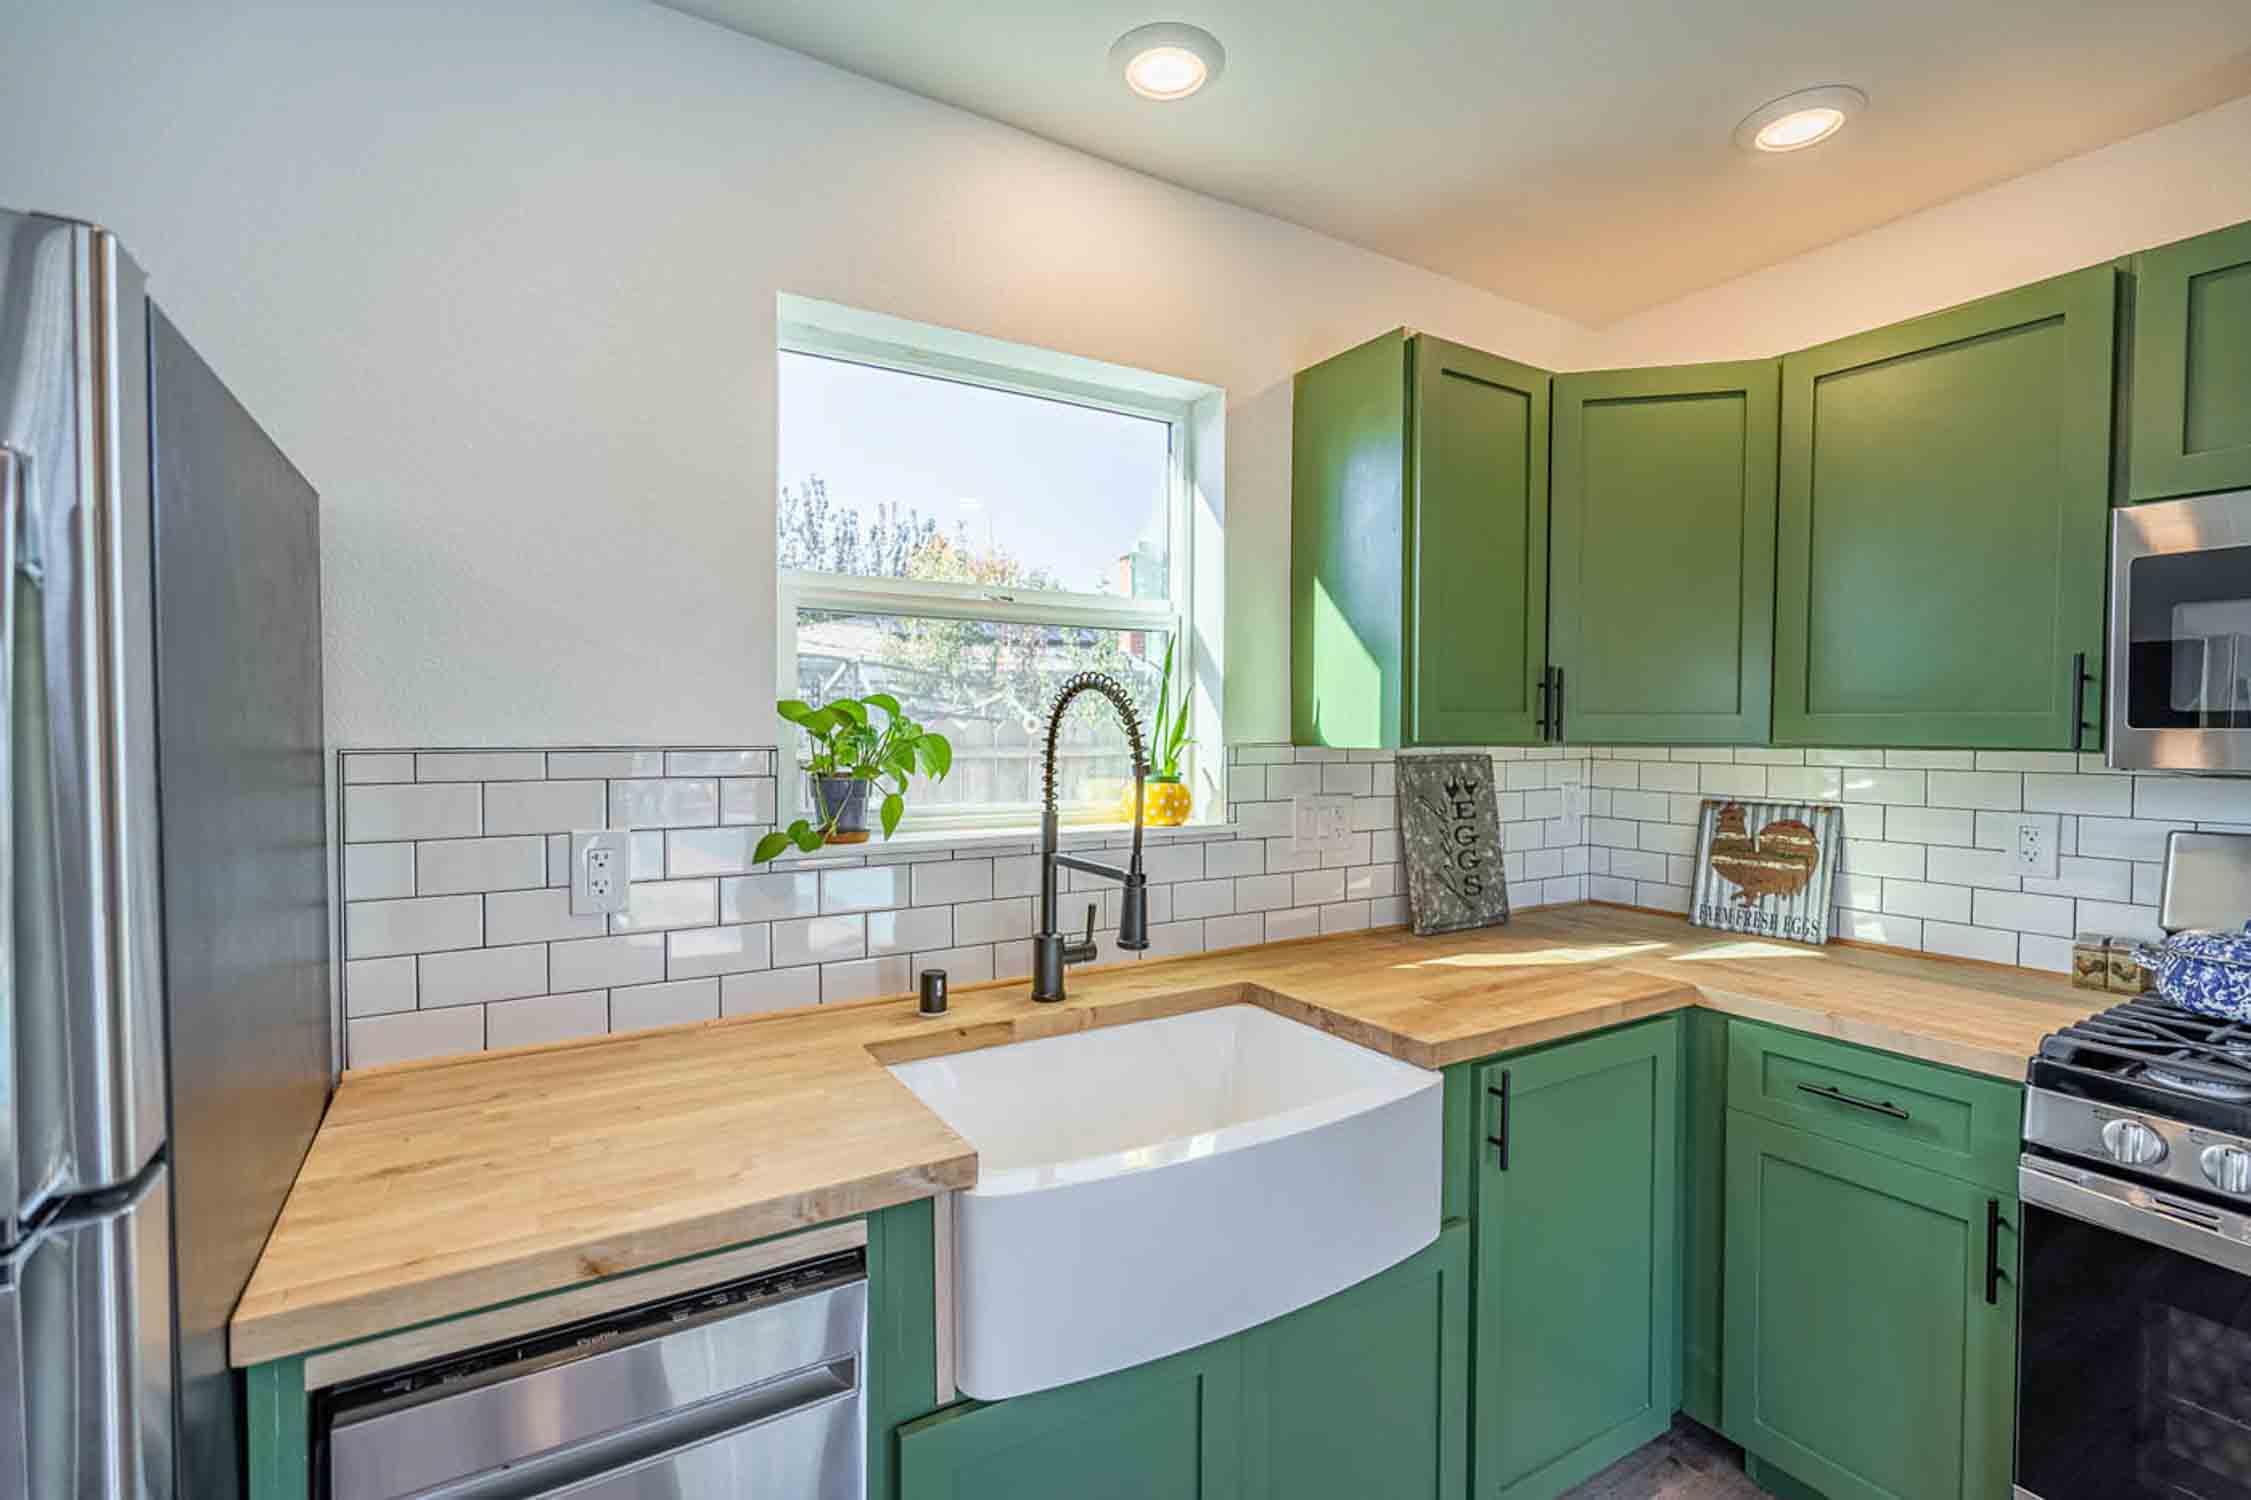 A Anchored Tiny Homes modern tiny home with a dark green kitchen, provided by our Salt Lake City guest house builder.